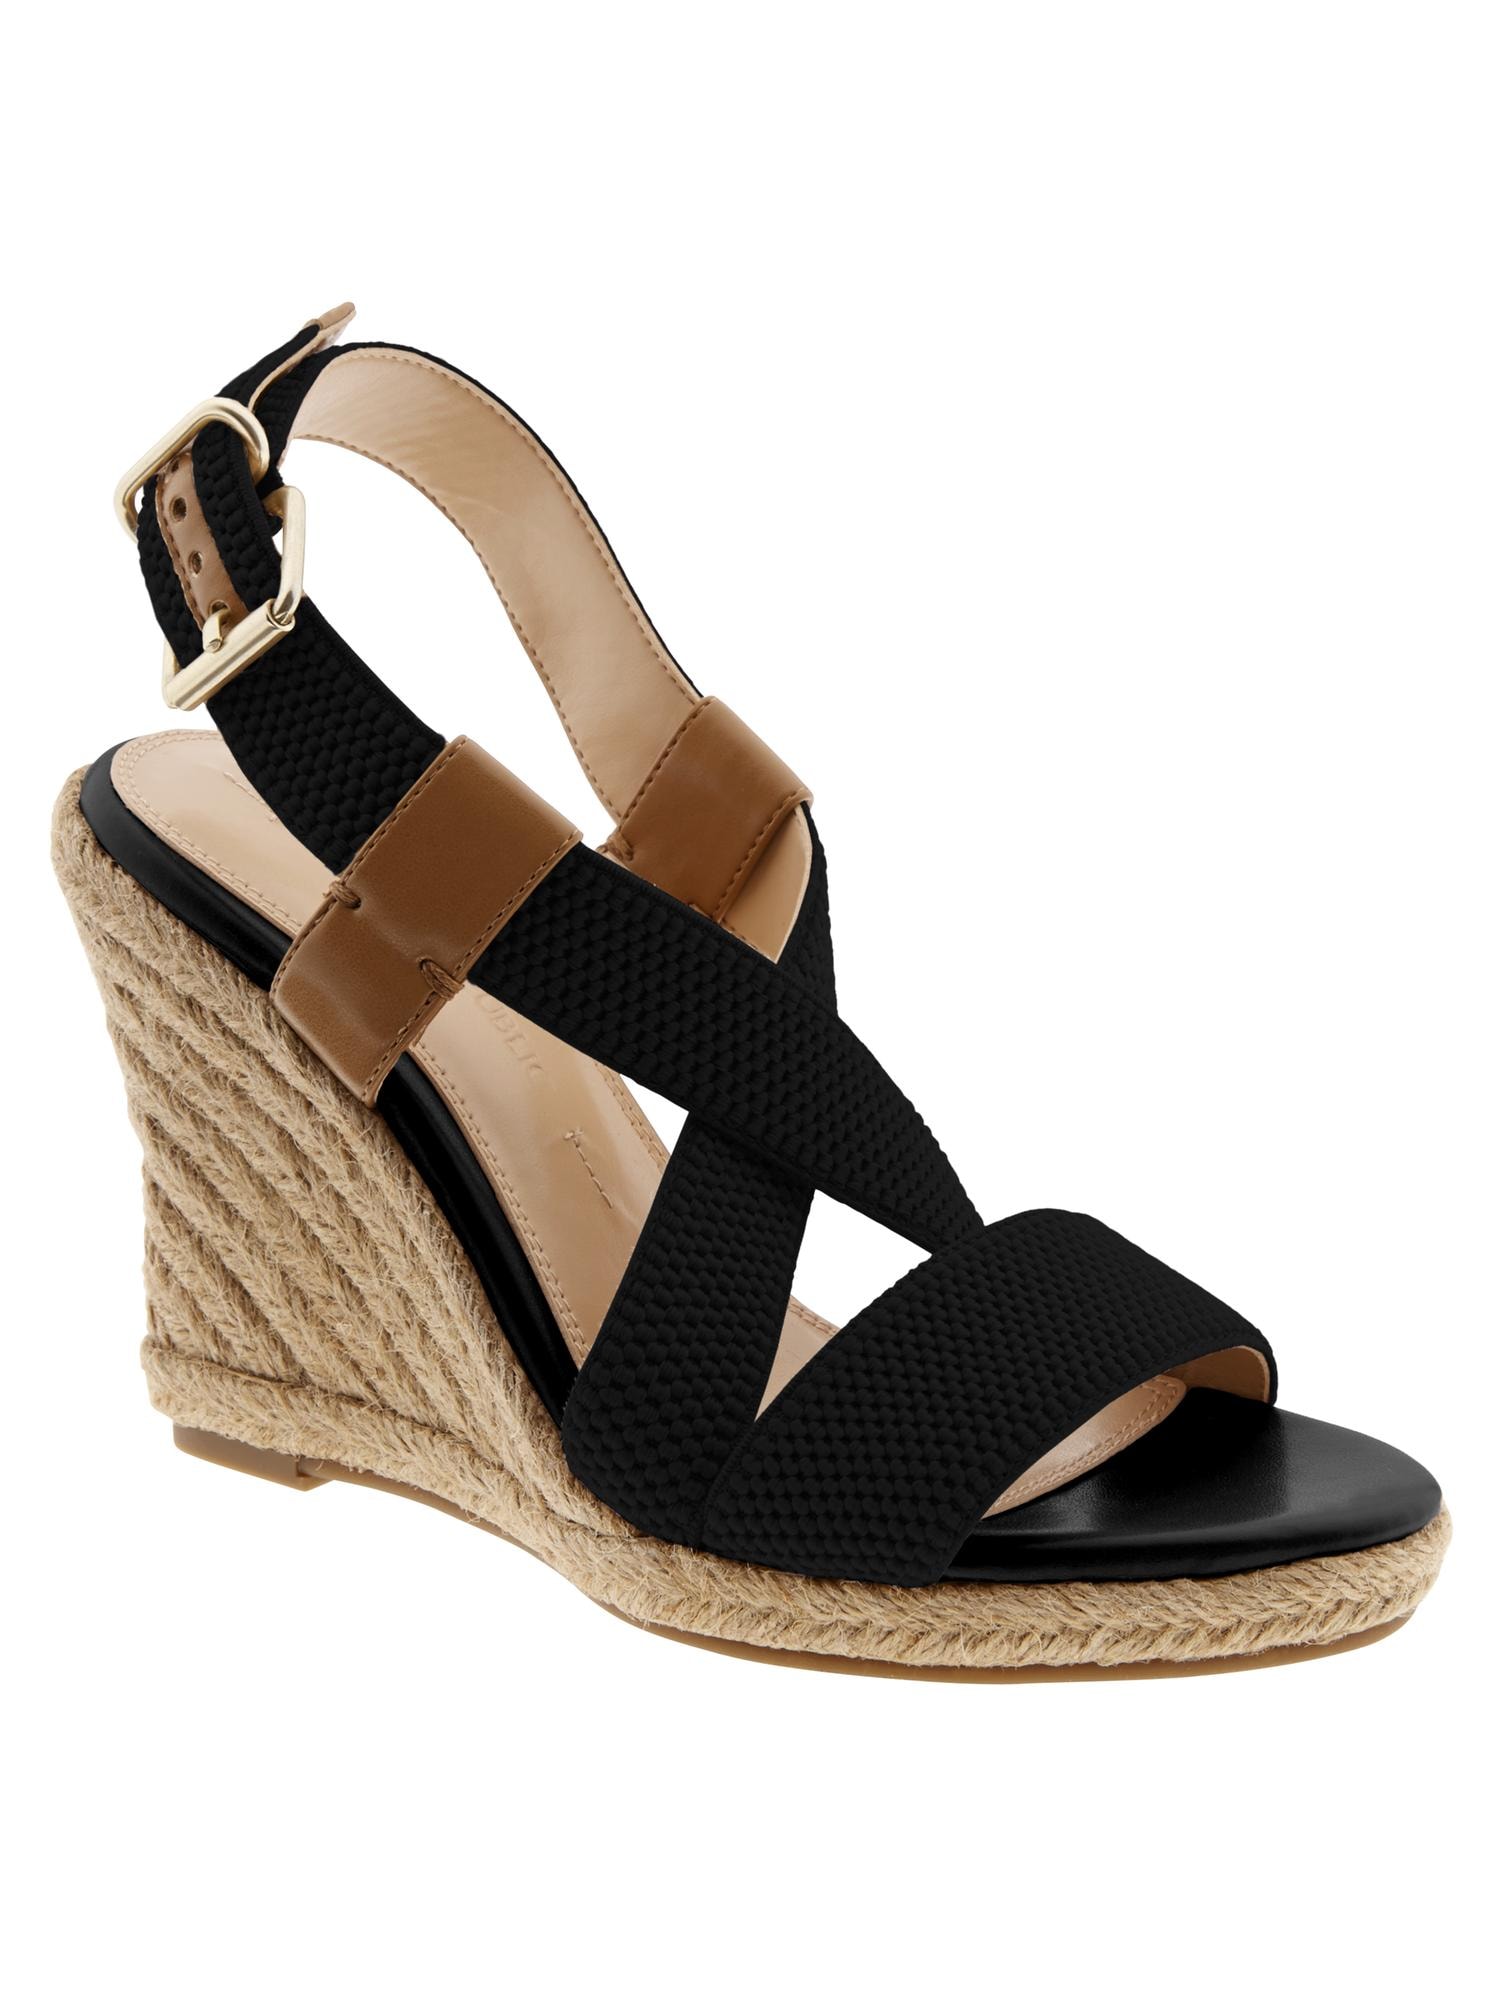 Pipperr Espadrille Wedge